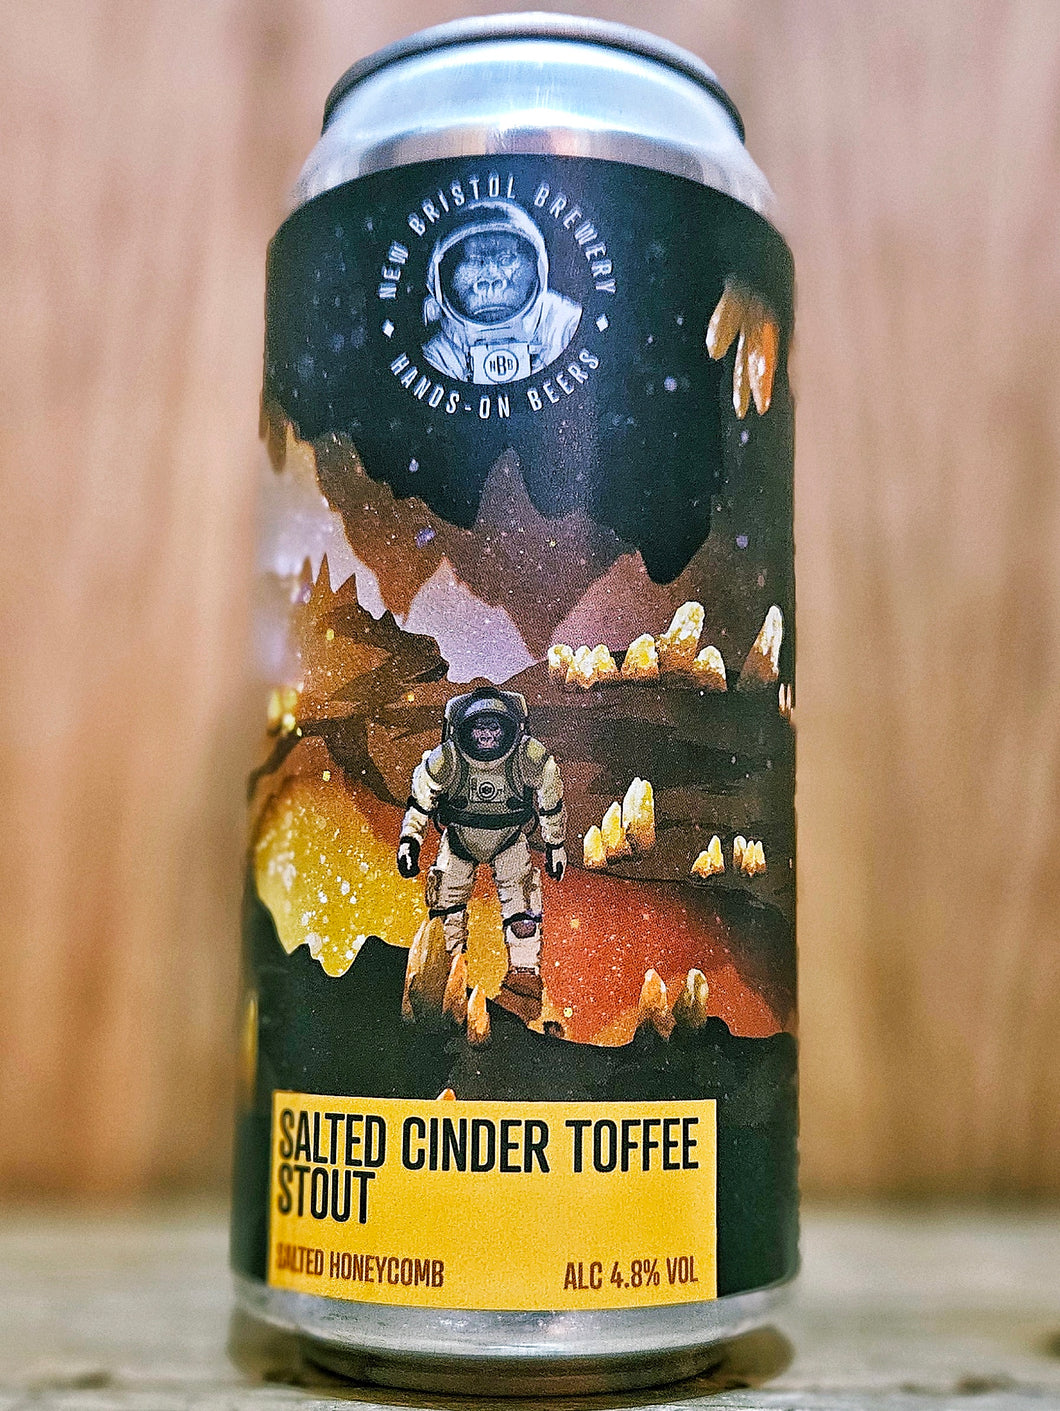 New Bristol Brewing Co - Salted Cinder Toffee Stout